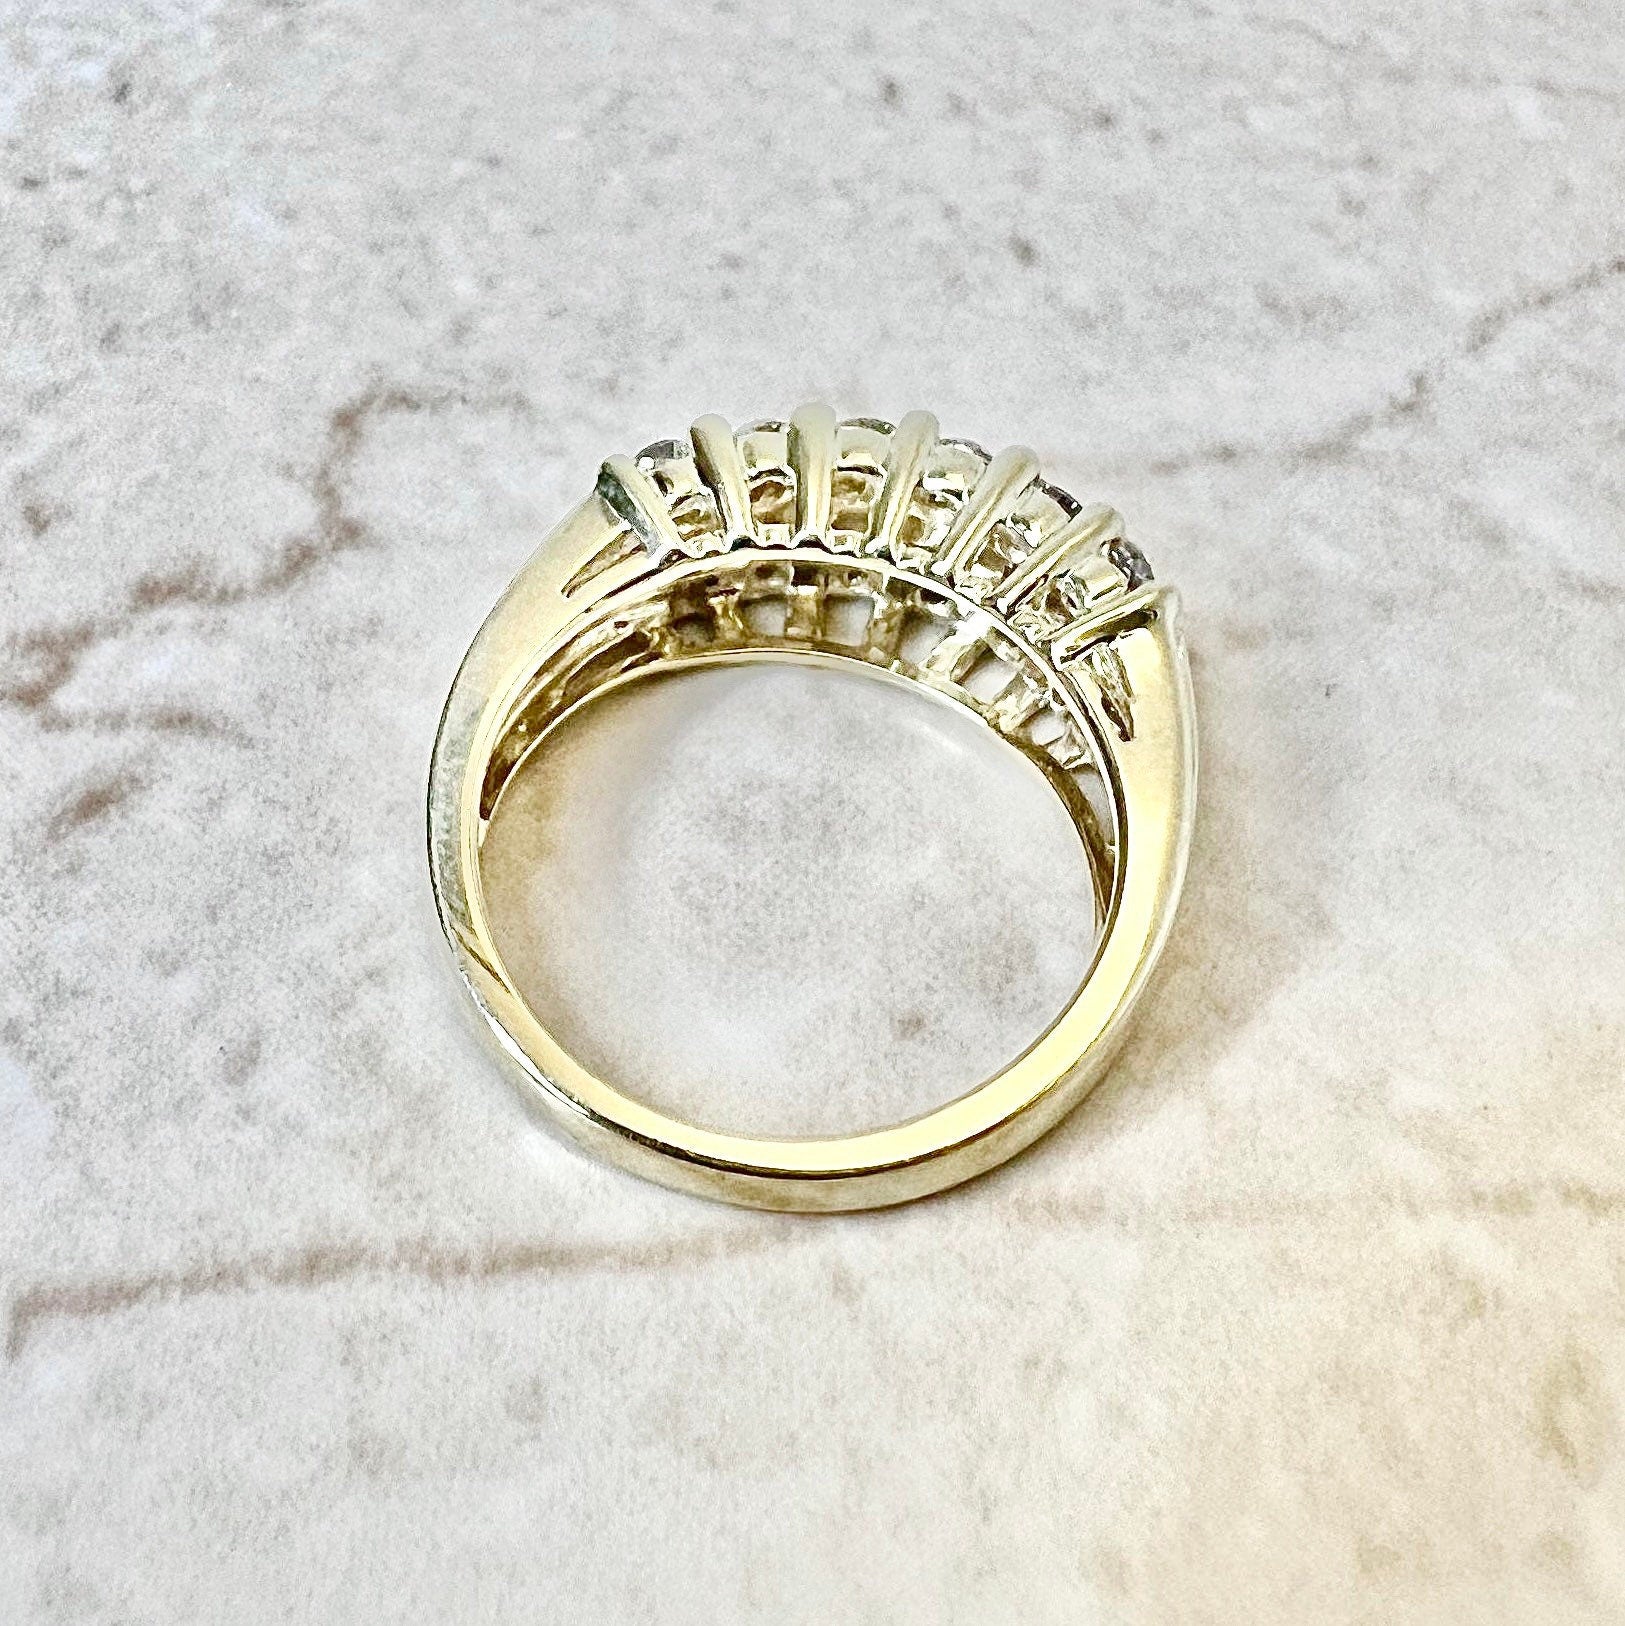 14K Triple Row Diamond Band Ring - Yellow Gold Eternity Ring - Wedding Ring - Bridal Jewelry - Anniversary Ring - Best Gift For Her